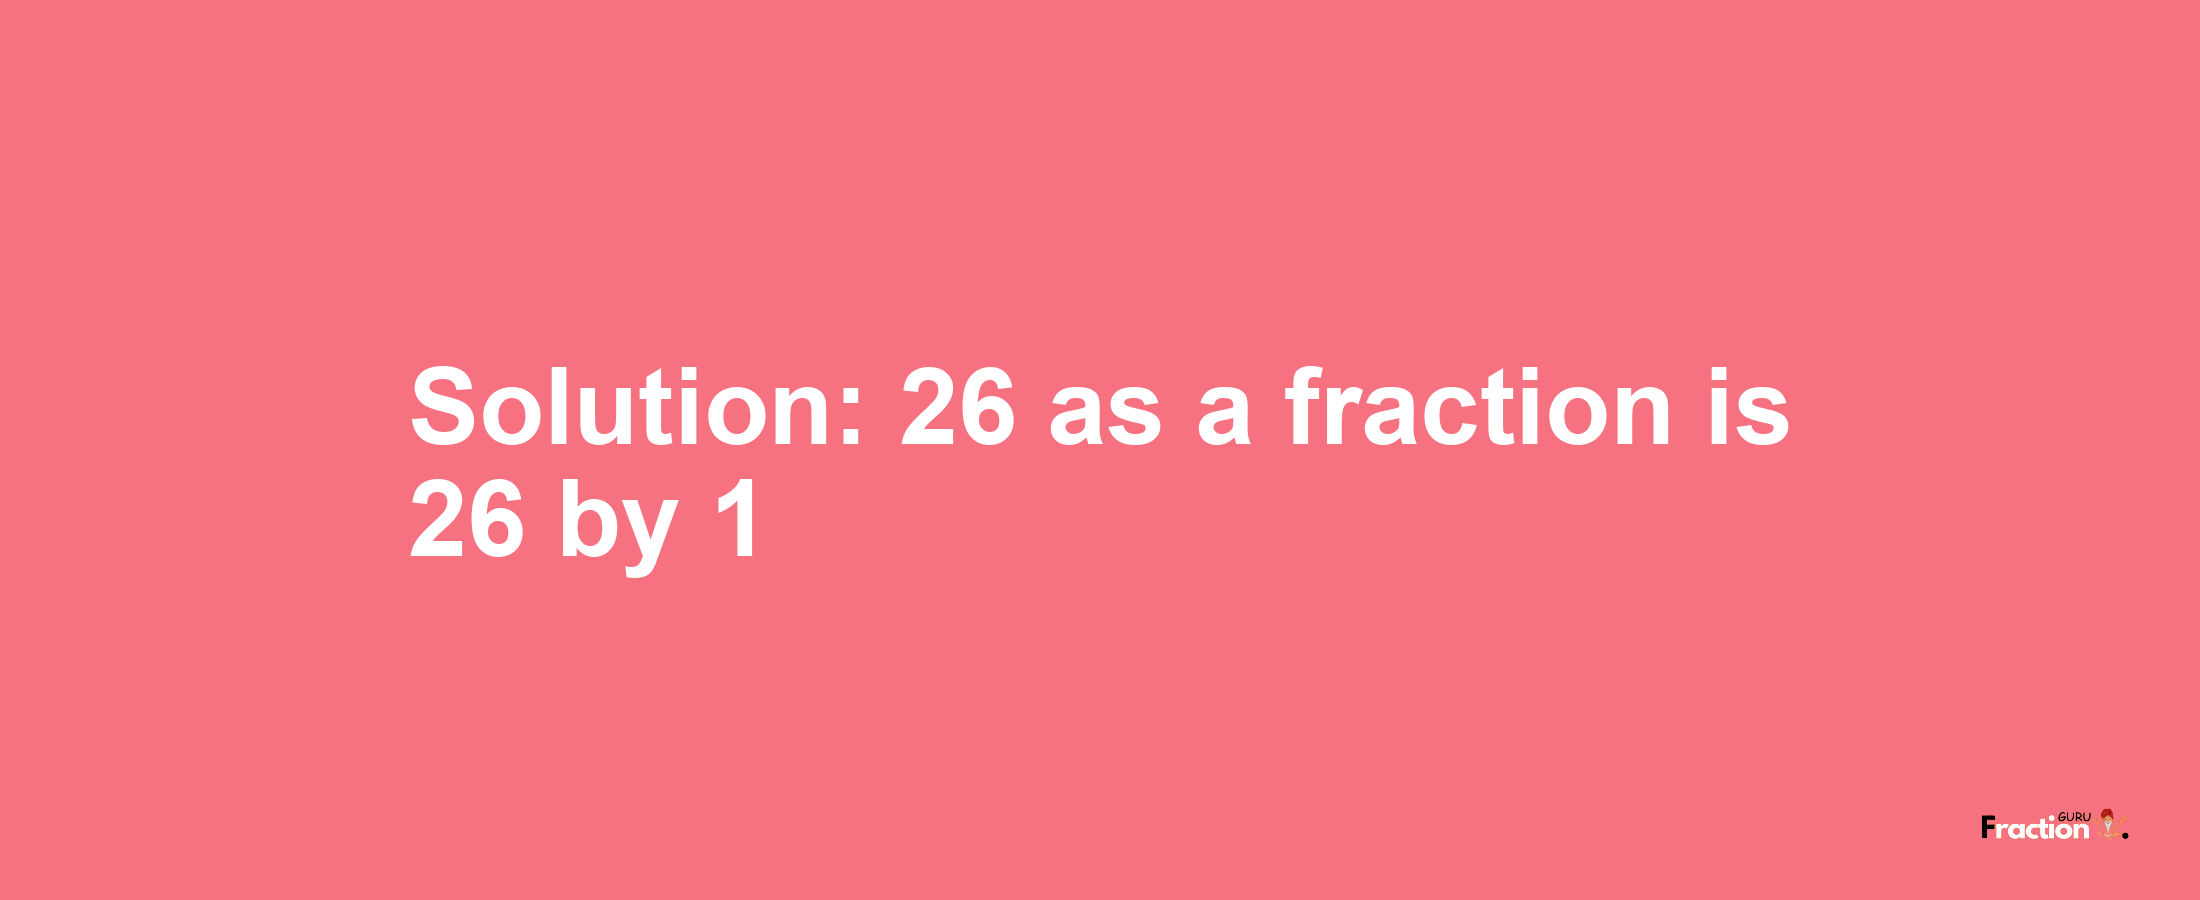 Solution:26 as a fraction is 26/1